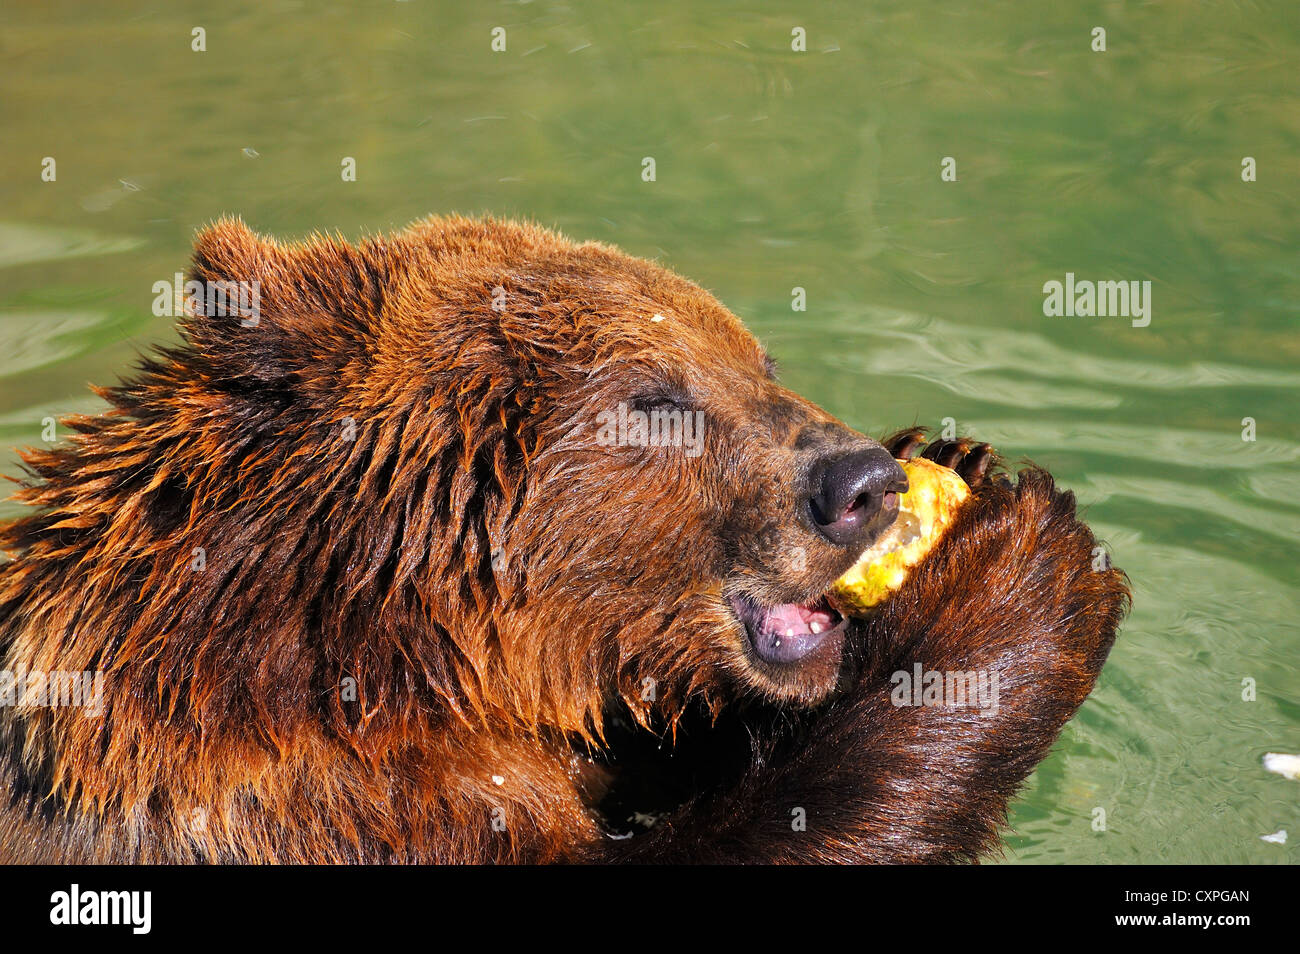 Dinner time at the Bear-Park in Bern, Switzerland. Stock Photo